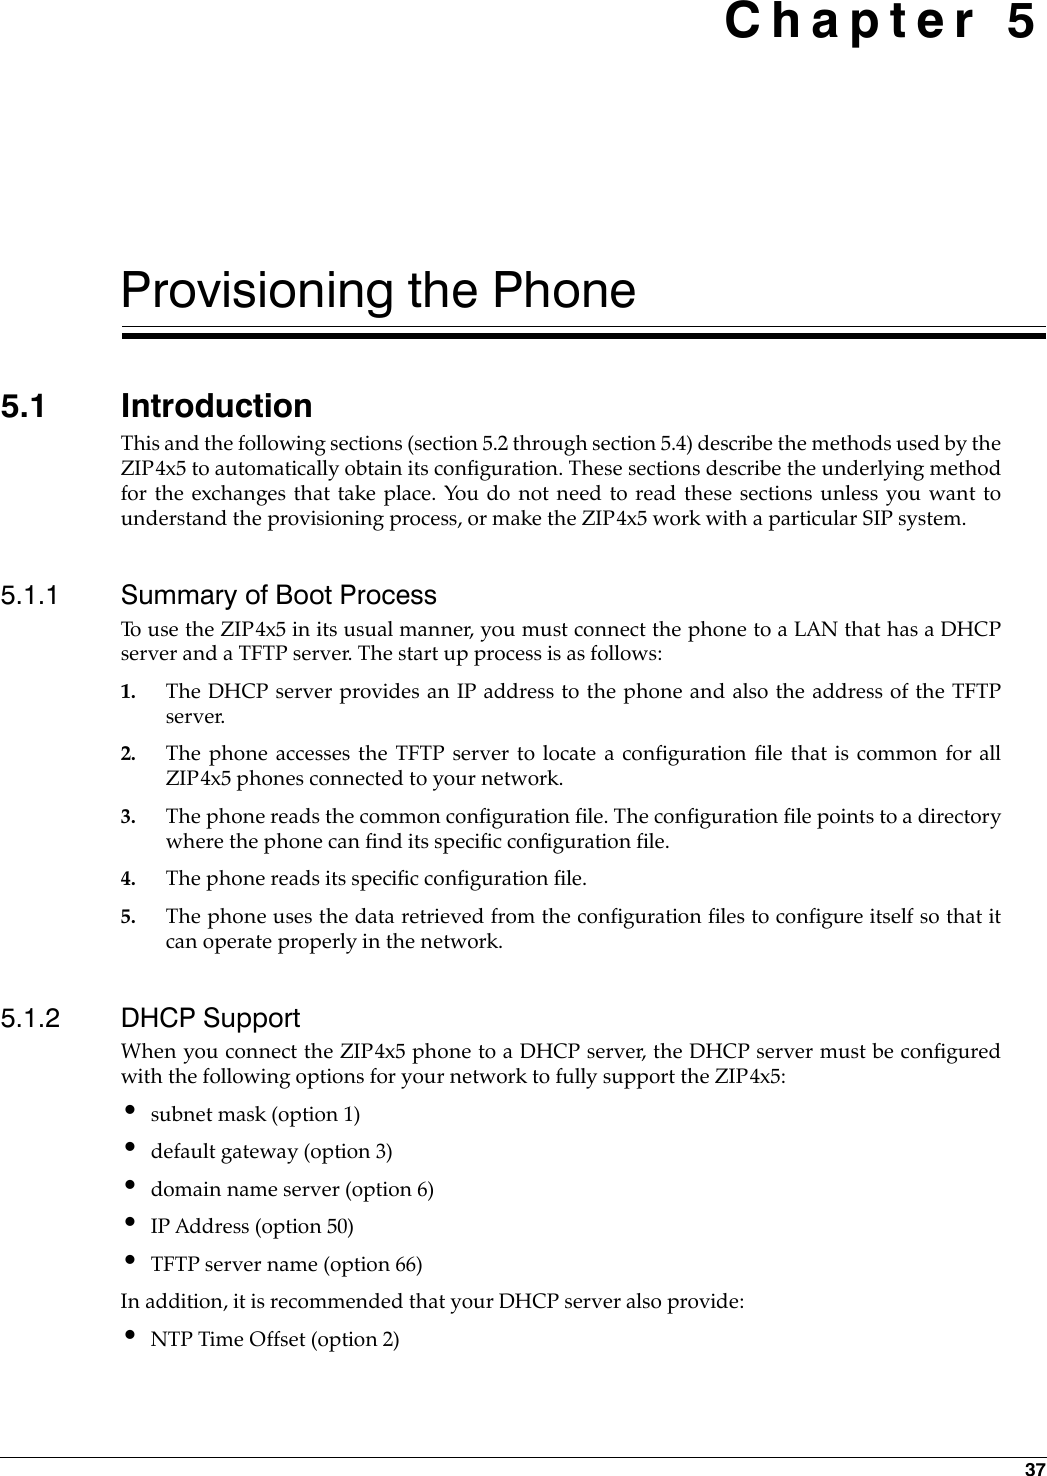 37 Chapter 5Provisioning the Phone5.1 IntroductionThis and the following sections (section 5.2 through section 5.4) describe the methods used by theZIP4x5 to automatically obtain its configuration. These sections describe the underlying methodfor the exchanges that take place. You do not need to read these sections unless you want tounderstand the provisioning process, or make the ZIP4x5 work with a particular SIP system.5.1.1 Summary of Boot ProcessTo use the ZIP4x5 in its usual manner, you must connect the phone to a LAN that has a DHCPserver and a TFTP server. The start up process is as follows:1. The DHCP server provides an IP address to the phone and also the address of the TFTPserver.2. The phone accesses the TFTP server to locate a configuration file that is common for allZIP4x5 phones connected to your network. 3. The phone reads the common configuration file. The configuration file points to a directorywhere the phone can find its specific configuration file.4. The phone reads its specific configuration file. 5. The phone uses the data retrieved from the configuration files to configure itself so that itcan operate properly in the network.5.1.2 DHCP SupportWhen you connect the ZIP4x5 phone to a DHCP server, the DHCP server must be configuredwith the following options for your network to fully support the ZIP4x5:•subnet mask (option 1)•default gateway (option 3)•domain name server (option 6)•IP Address (option 50)•TFTP server name (option 66)In addition, it is recommended that your DHCP server also provide:•NTP Time Offset (option 2)